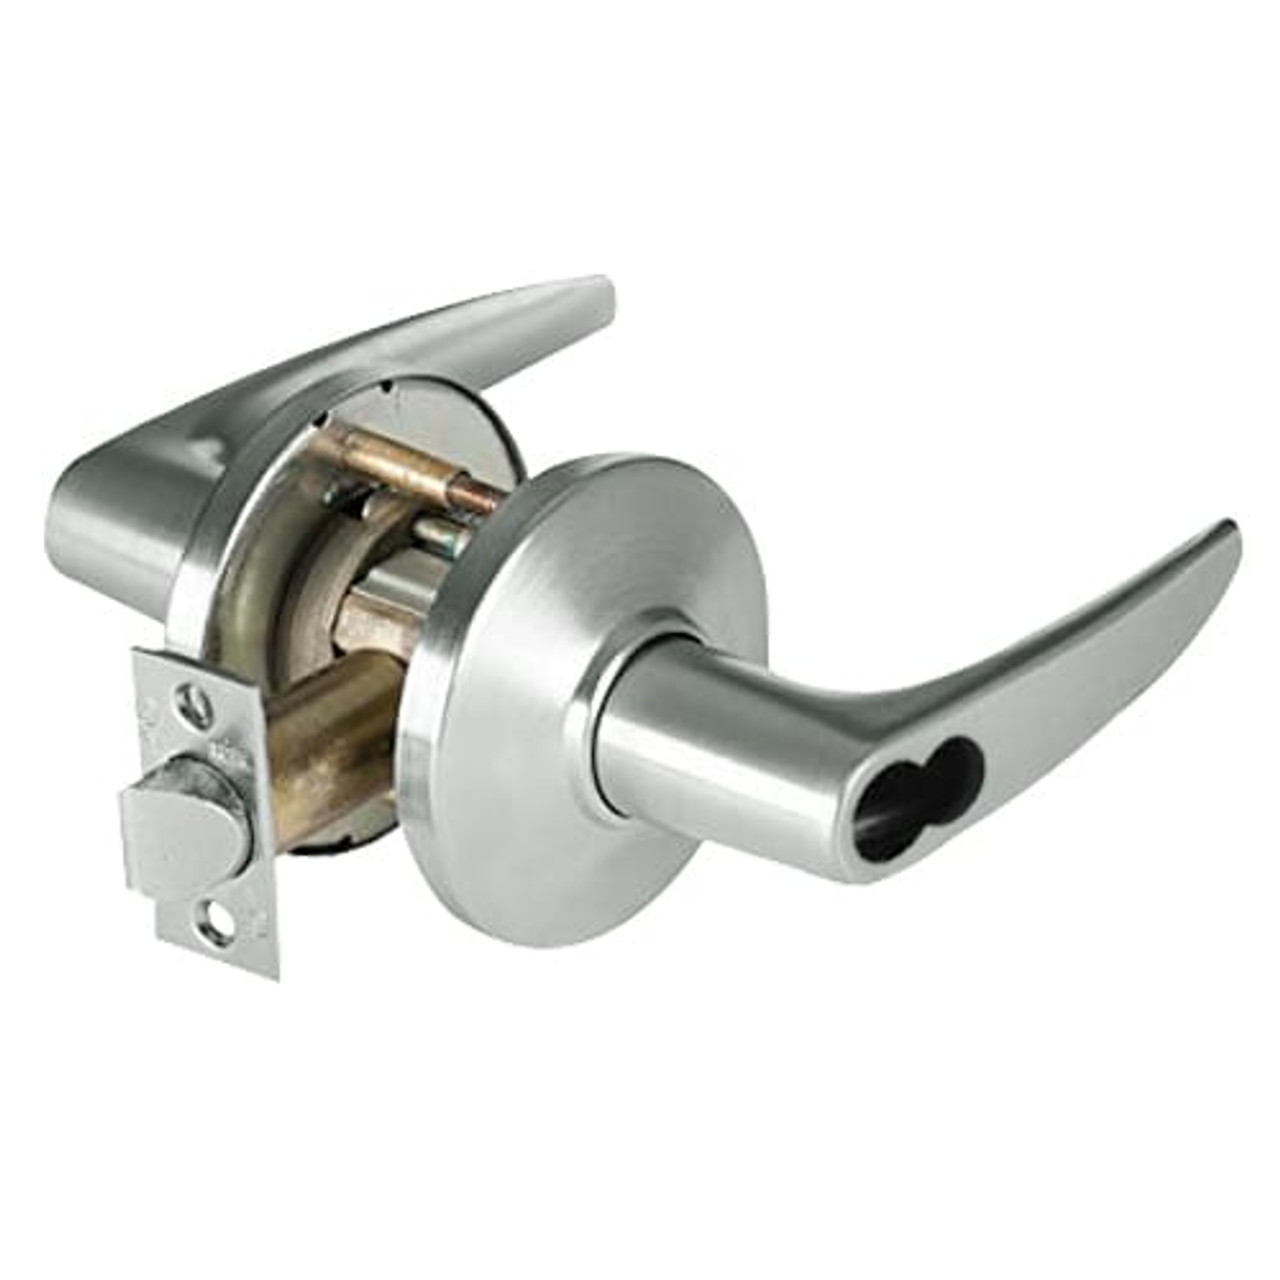 9K37W16DSTK618 Best 9K Series Institutional Cylindrical Lever Locks with Curved without Return Lever Design Accept 7 Pin Best Core in Bright Nickel